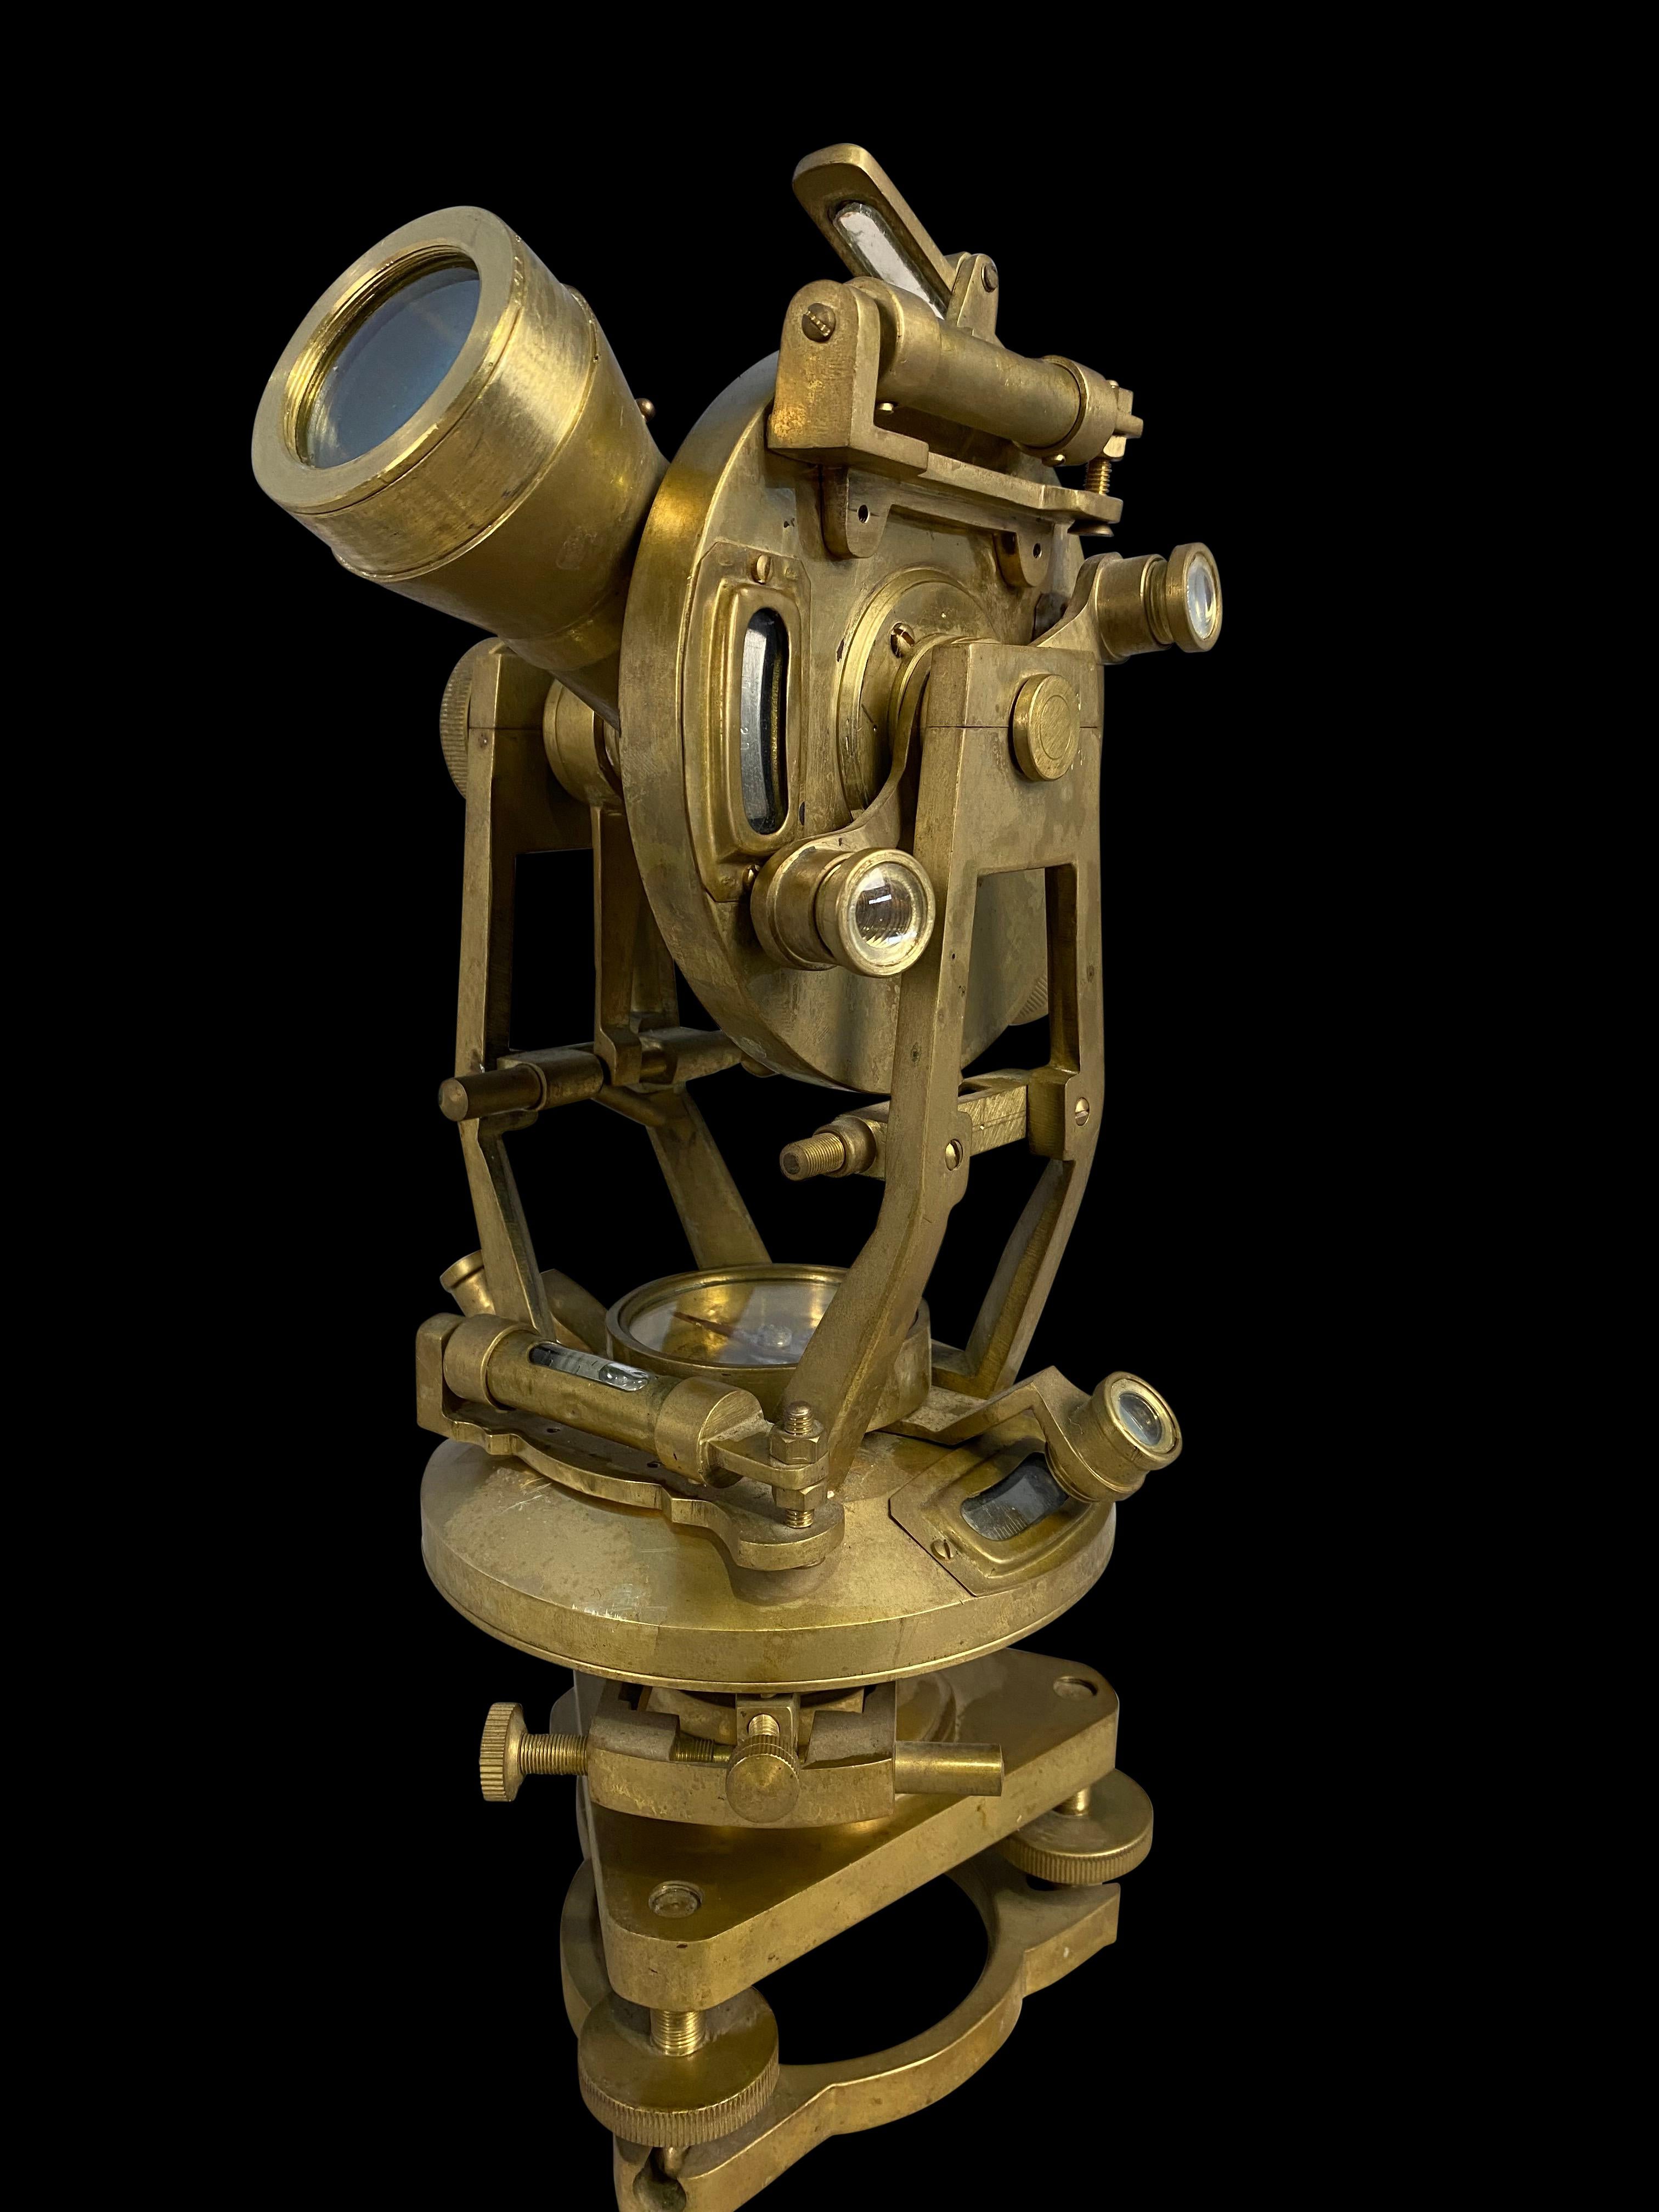 what is a theodolite used for